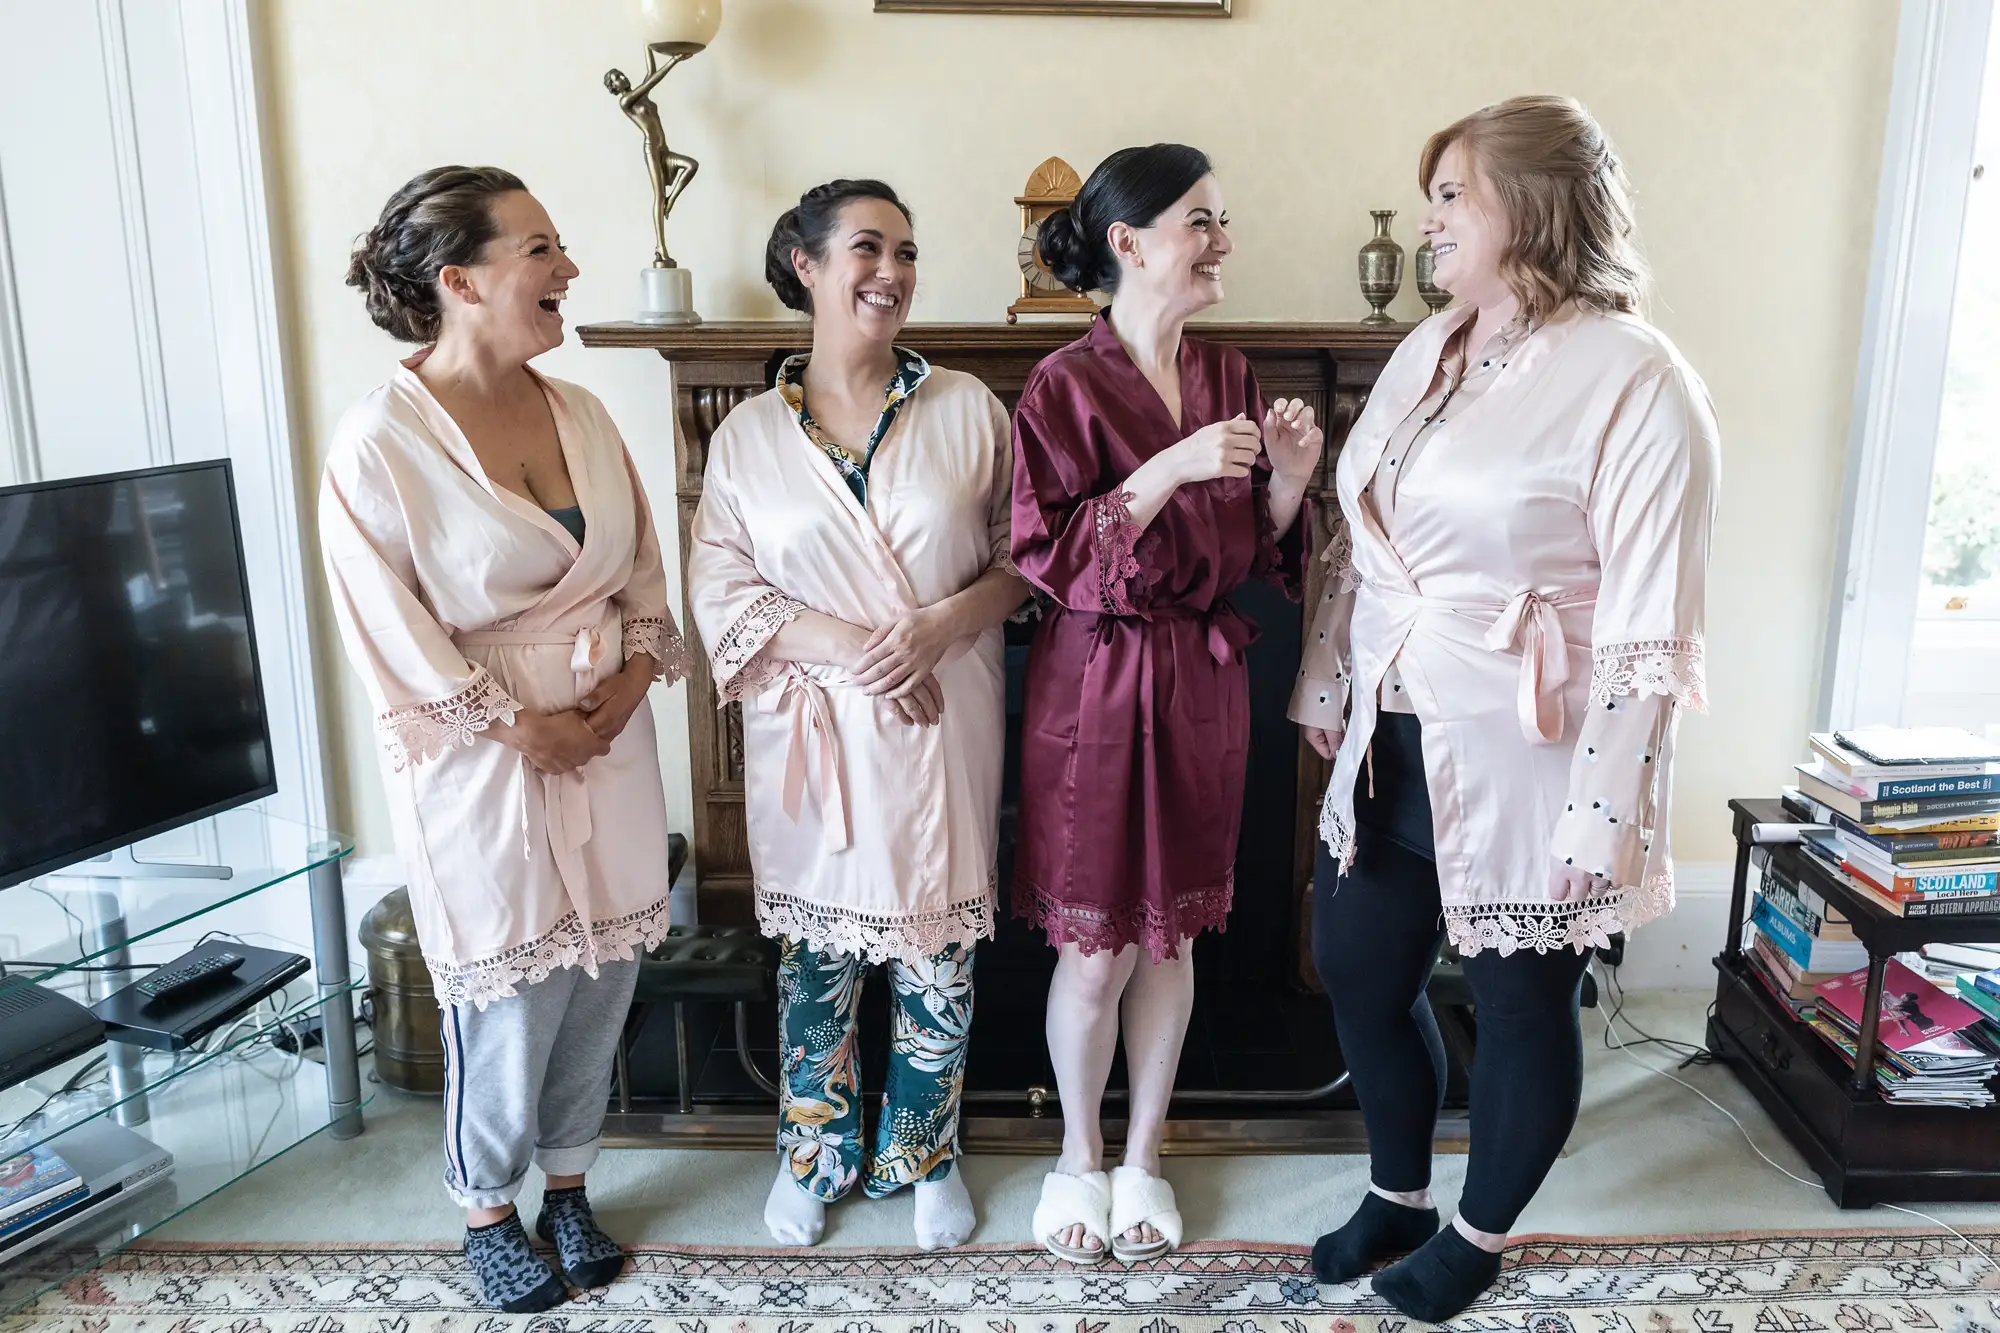 Four women in robes laughing together in a living room setting.